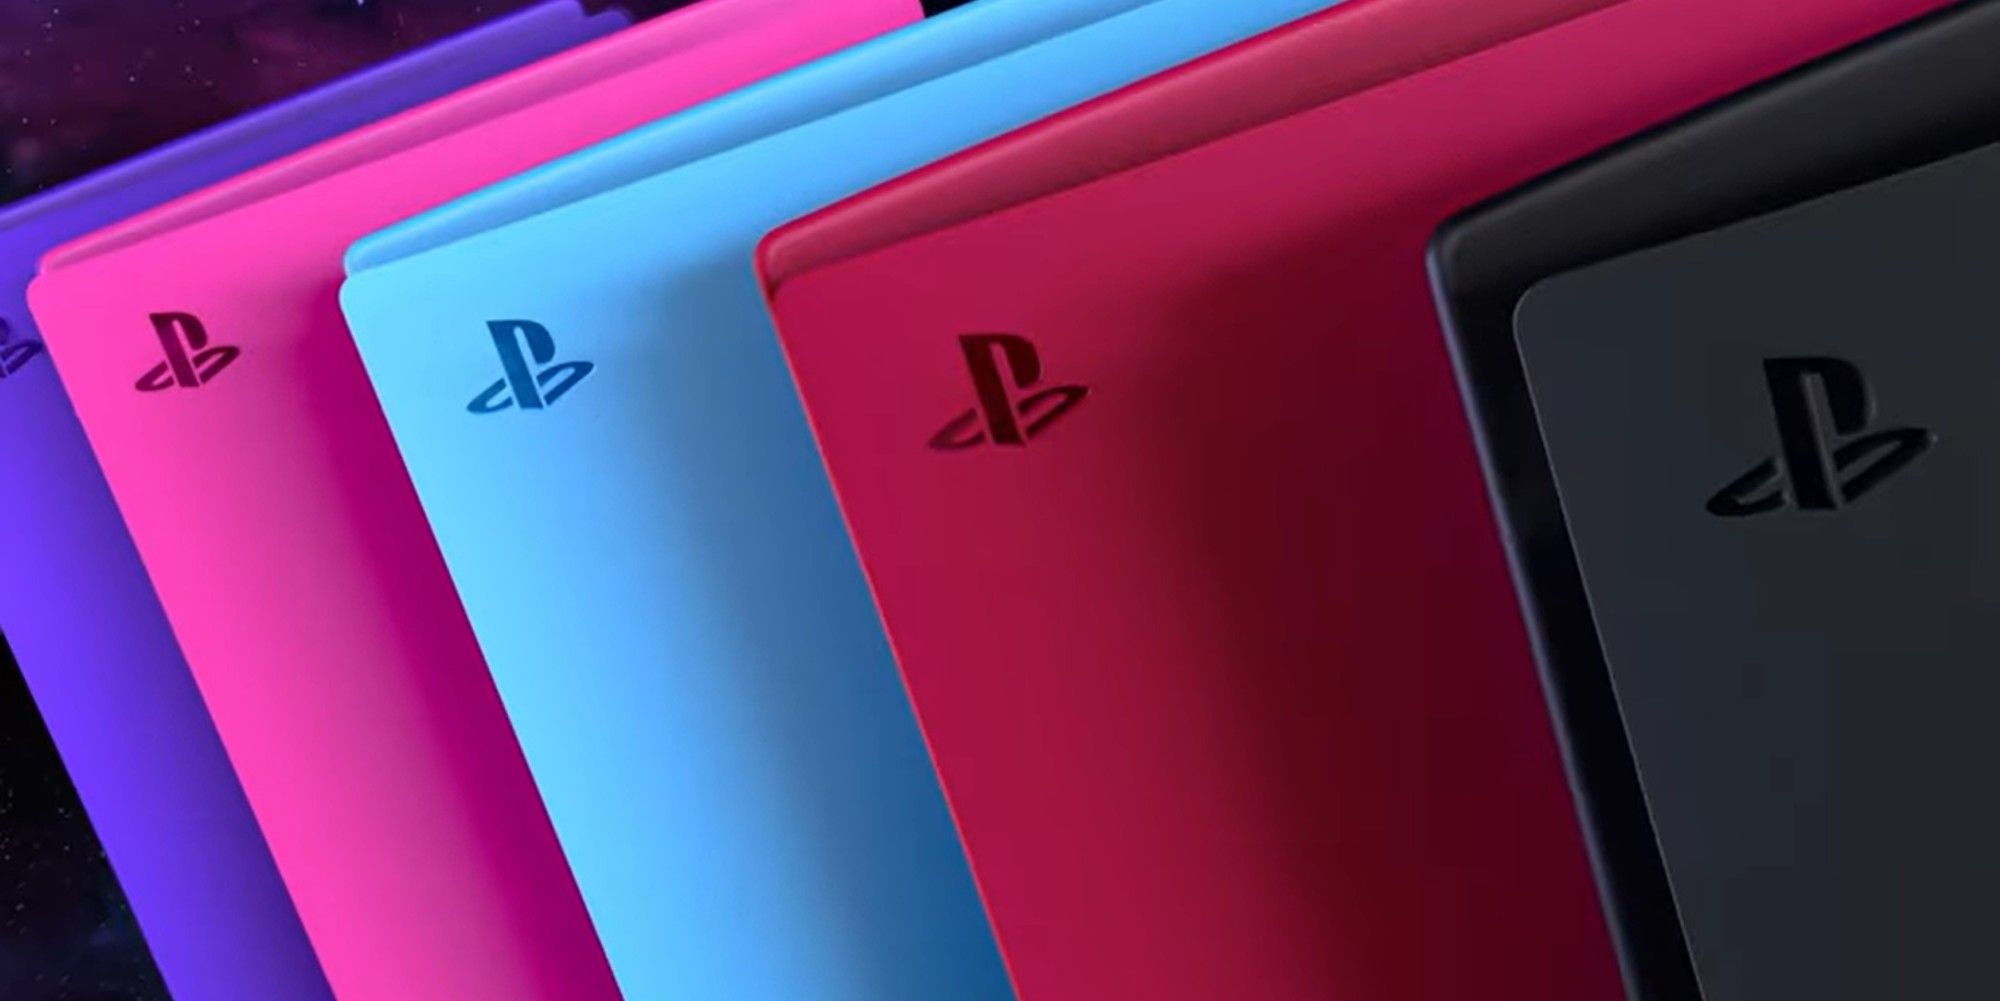 Retail Sales Of PS5 Console Covers Appear To Be Delayed